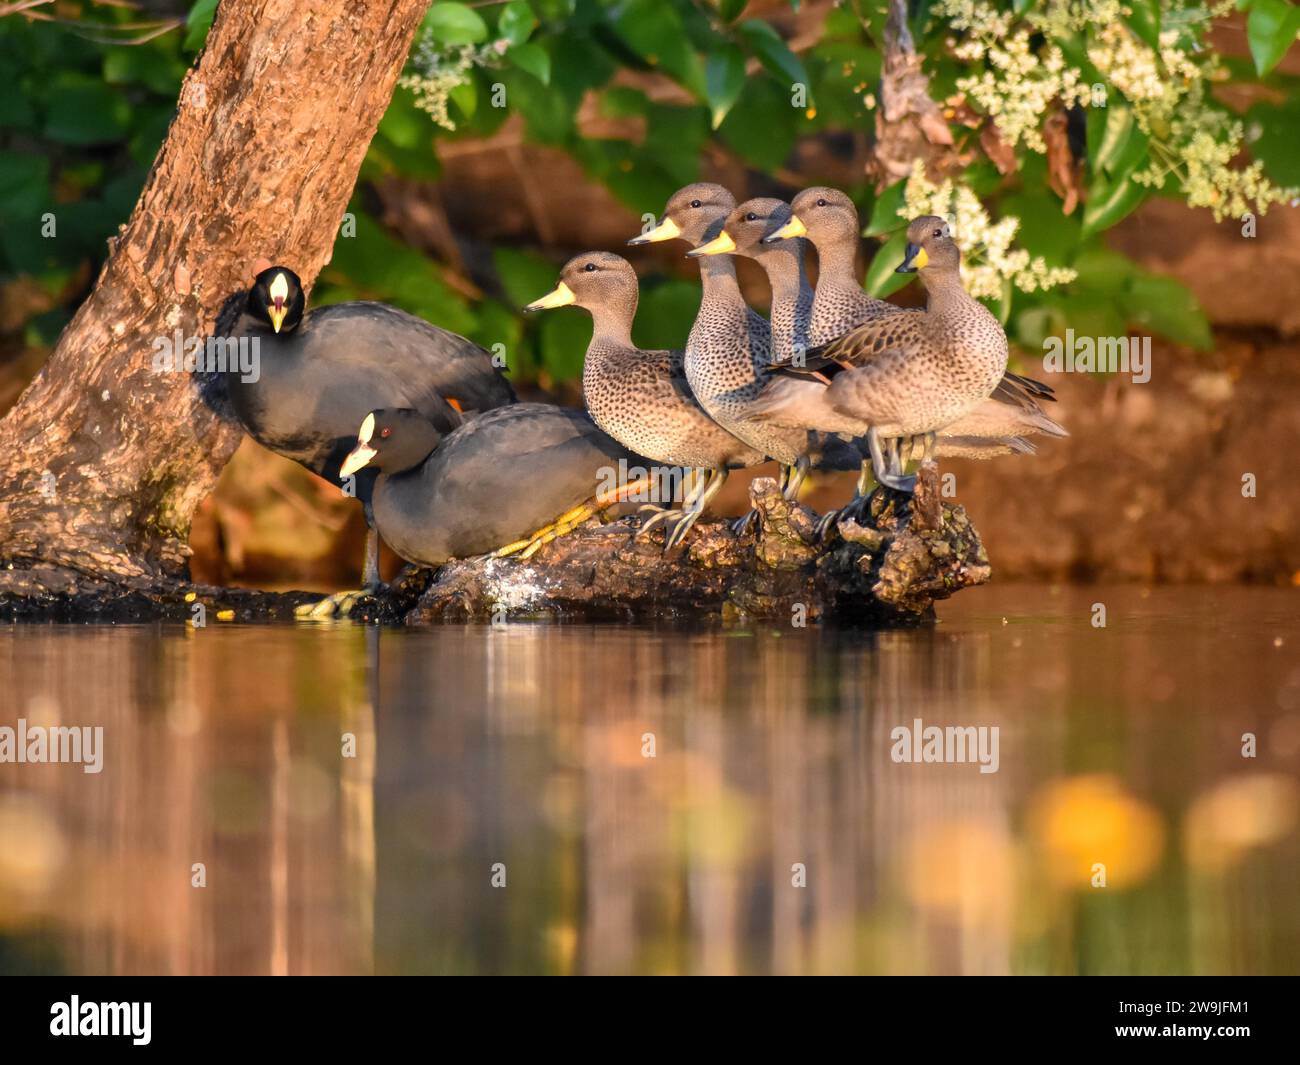 Brown-headed ducks (Anas flavirostris) with yellow-billed coots (Fulica armillata) in the wild in a park, Buenos Aires, Argentina Stock Photo